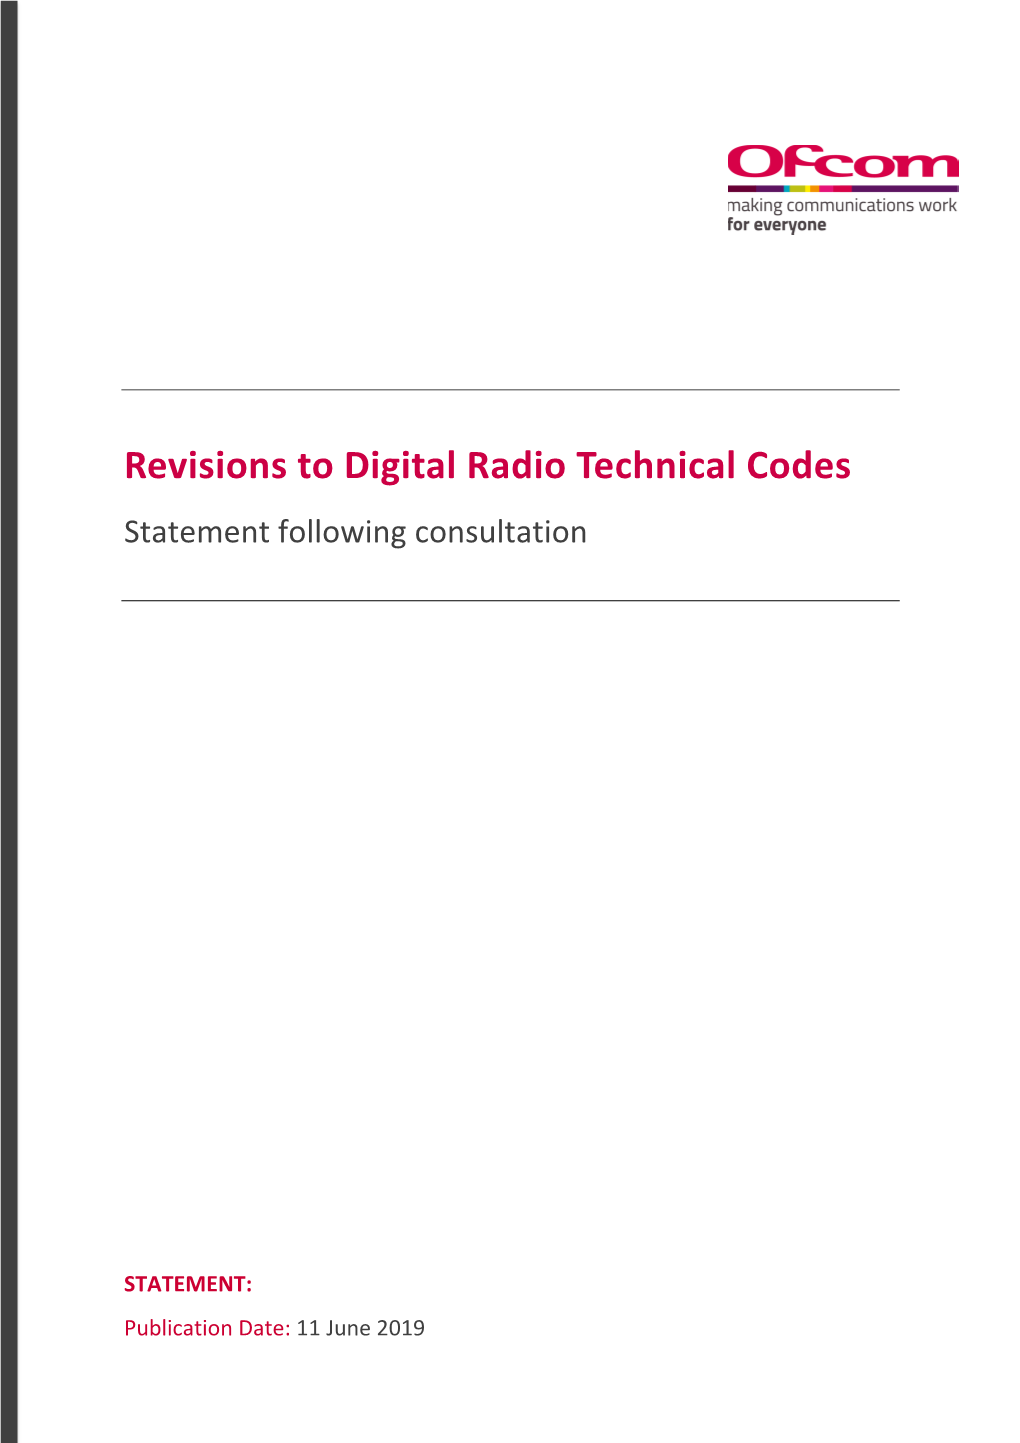 Revisions to Digital Radio Technical Codes Statement Following Consultation